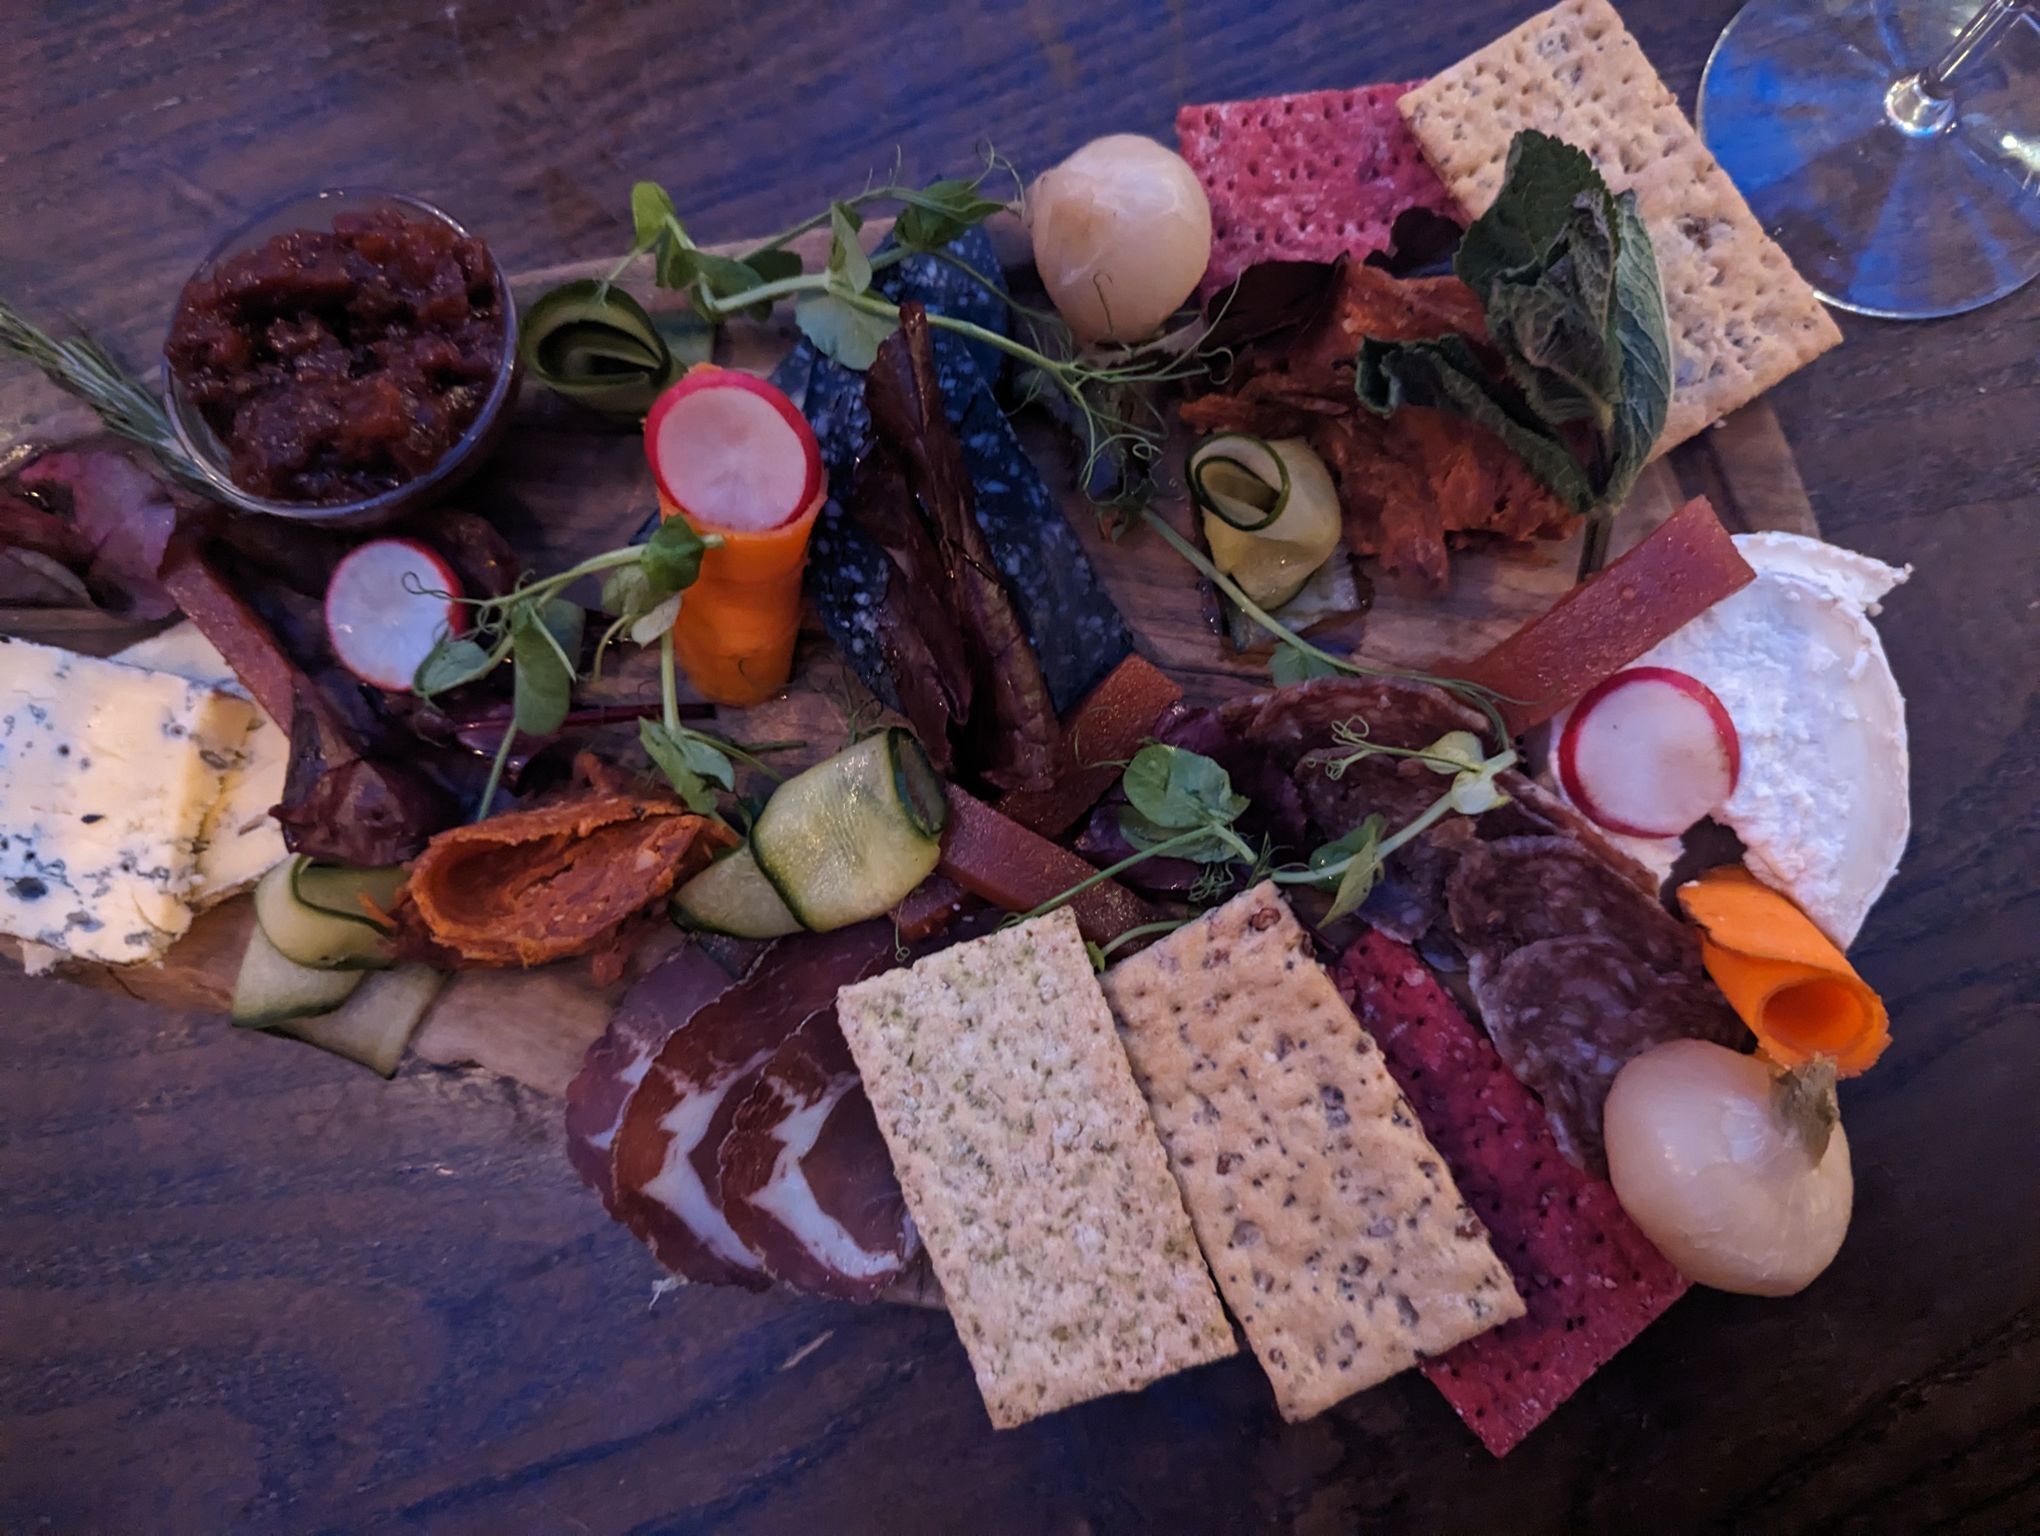 delicious looking charcuterie board with crackers, dry aged meat, chutney, bits of vegetables and cheese. spring menu